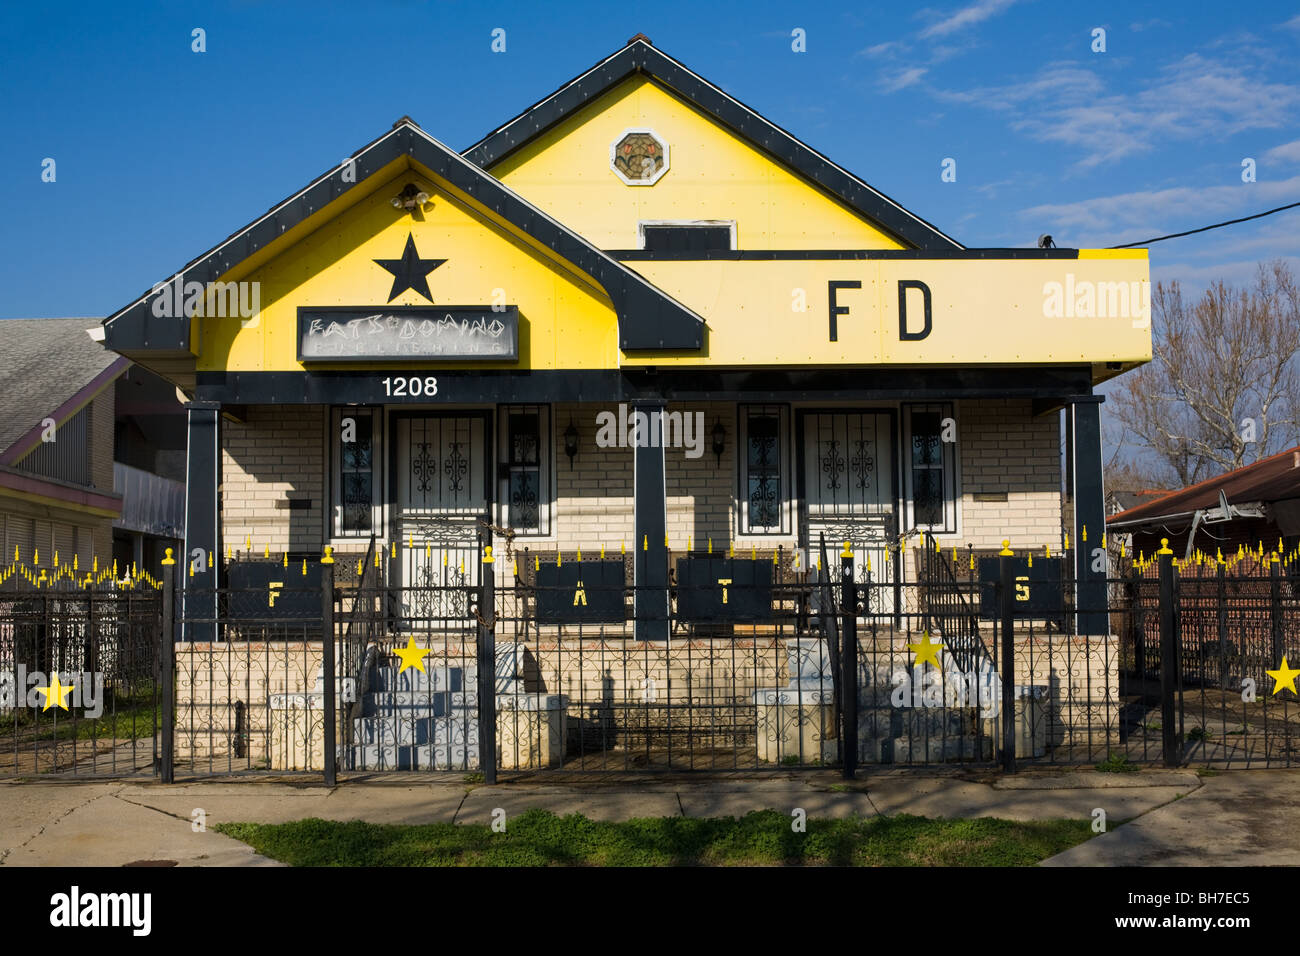 Home and studio of Fats Domino, Lower Ninth Ward, New Orleans, Louisiana Stock Photo